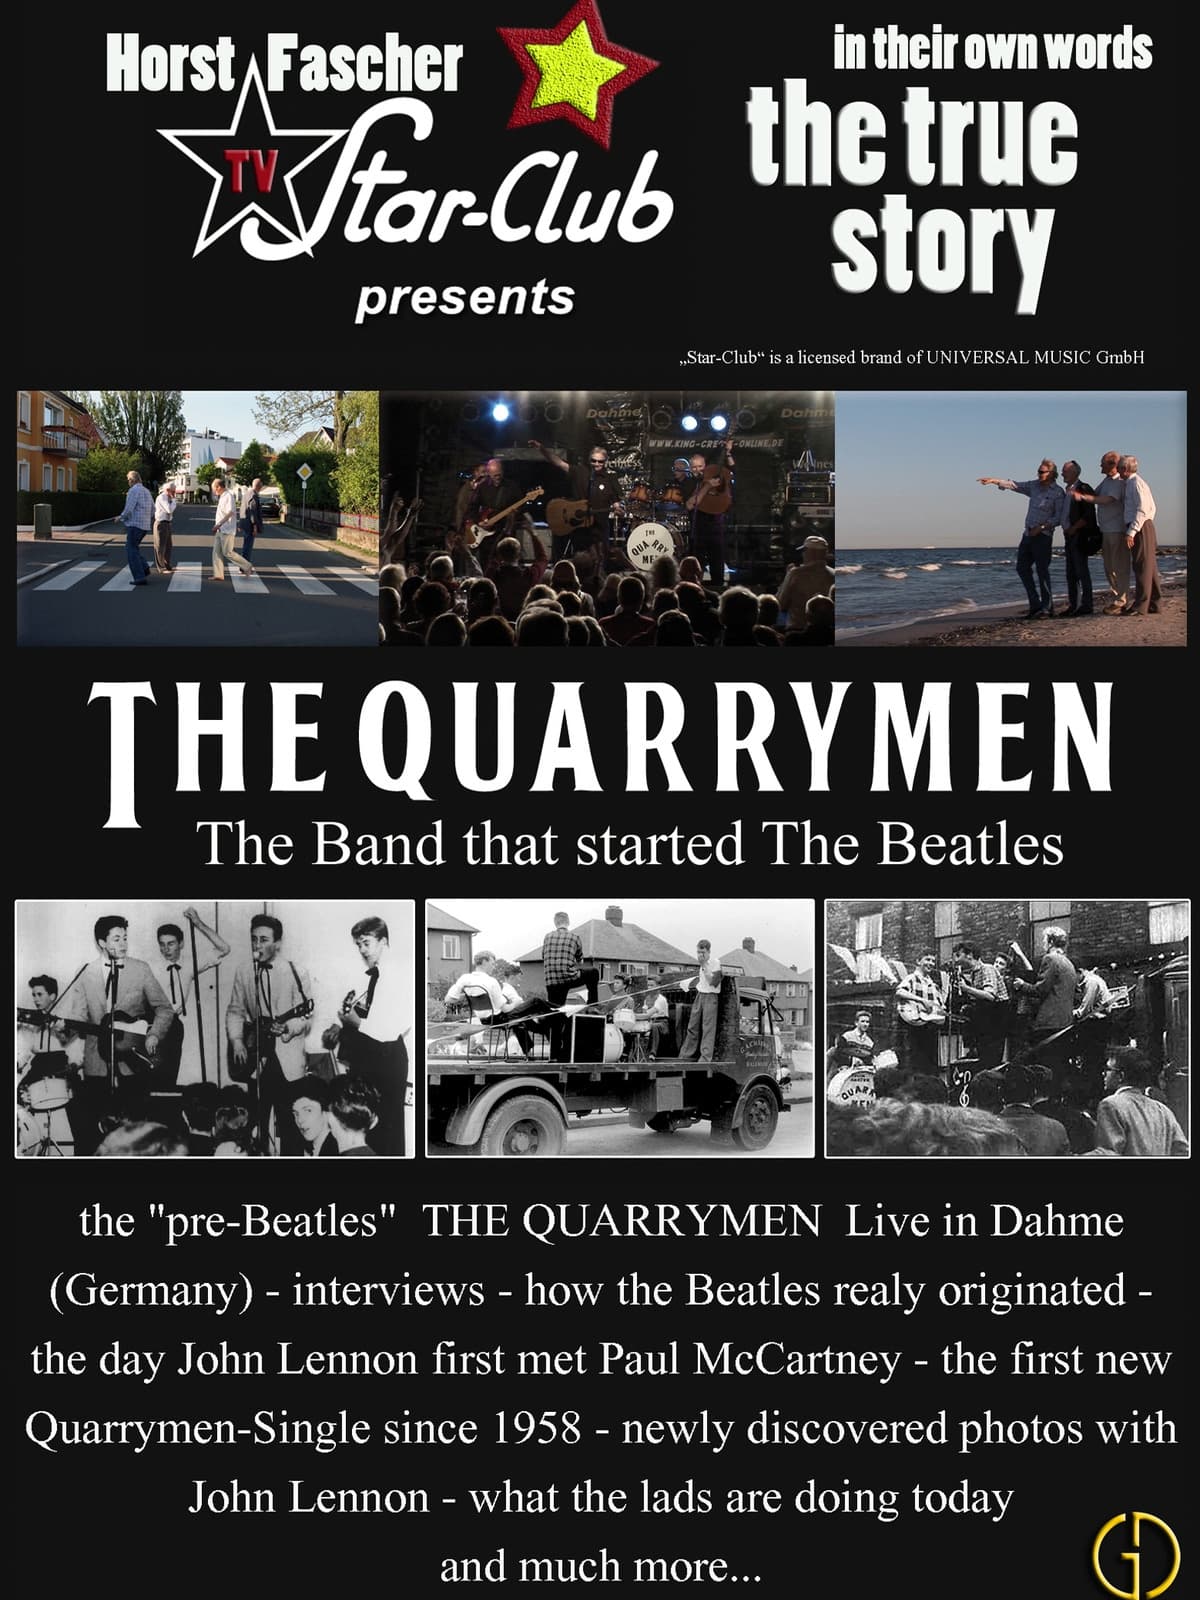 The Quarrymen - The Band that started The Beatles